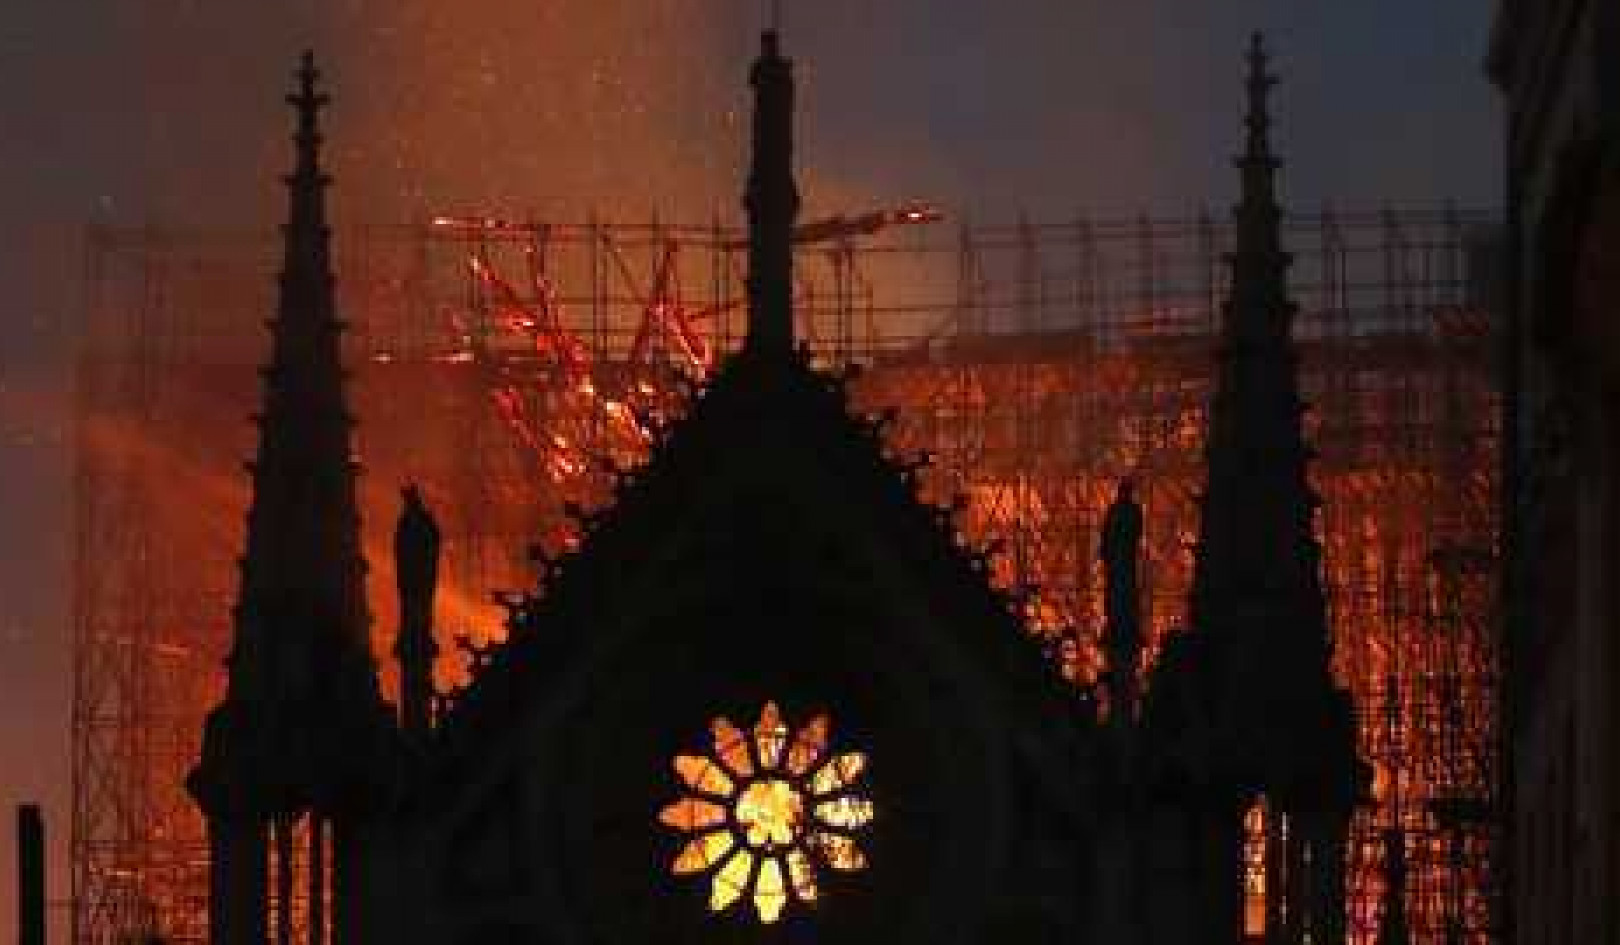 Why Are We So Moved By The Plight Of The Notre Dame?